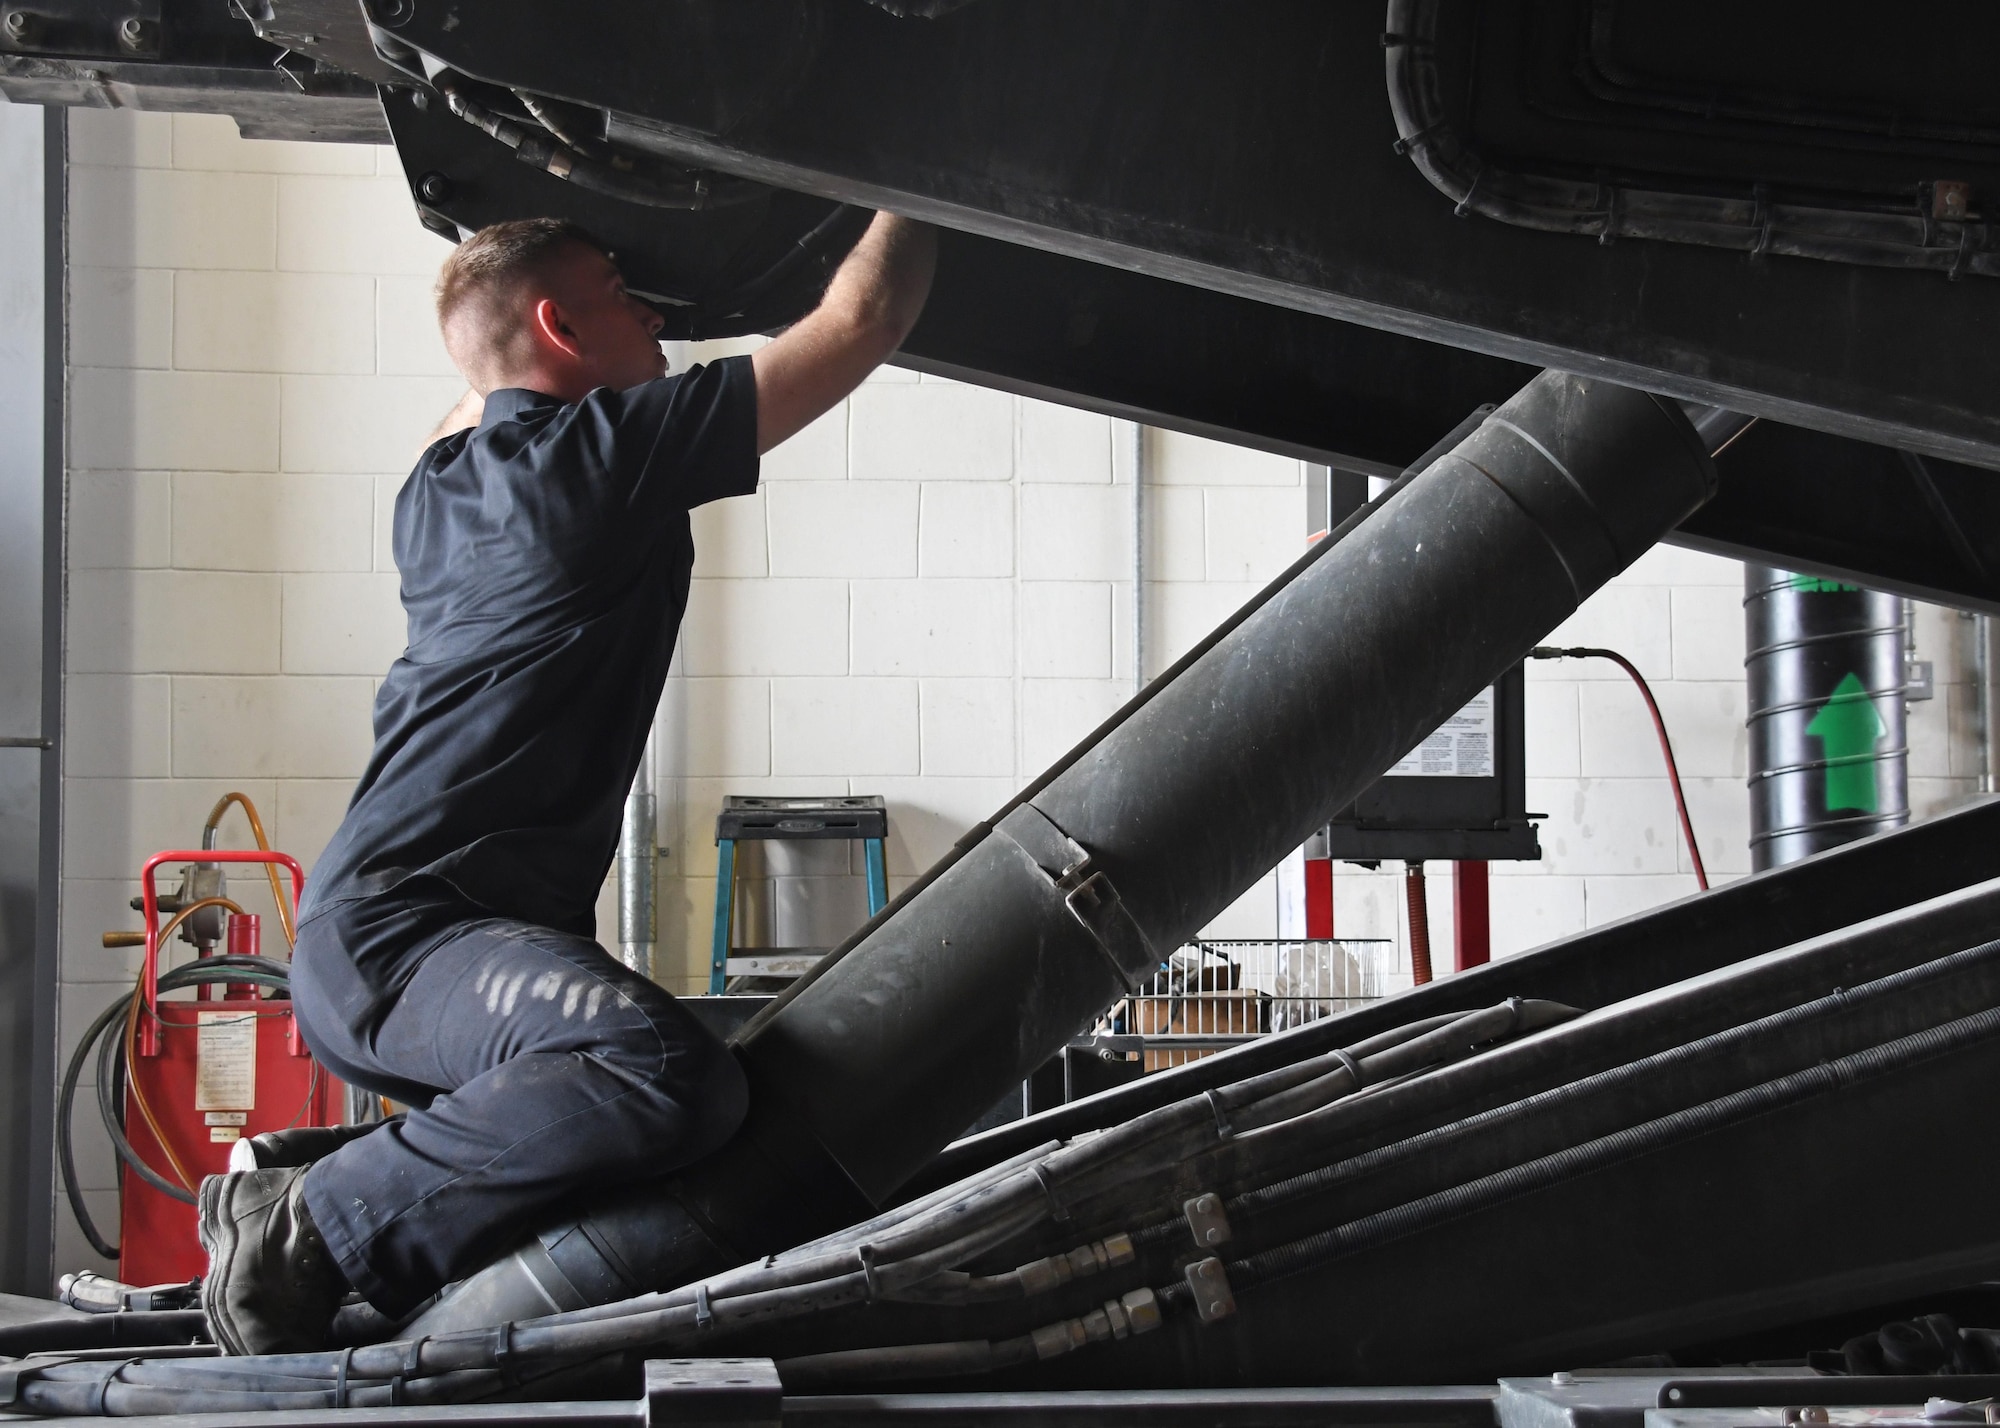 U.S. Air Force Staff Sgt. Michael Daniel, the material handling equipment NCO in charge with the 379th Expeditionary Logistics Readiness Squadron Vehicle Management Flight, repairs a hydraulic cylinder on a 25K loader at Al Udeid Air Base, Qatar, March 13, 2017. Hydraulic equipment uses hydraulic pressure to raise and lower weights that would otherwise be extremely difficult to use without the use of the 25K loaders, the Airmen at Al Udeid would be unable to load heavy cargo into aircraft such as the C-17 Globemaster III. (U.S. Air Force photo by Senior Airman Miles Wilson)